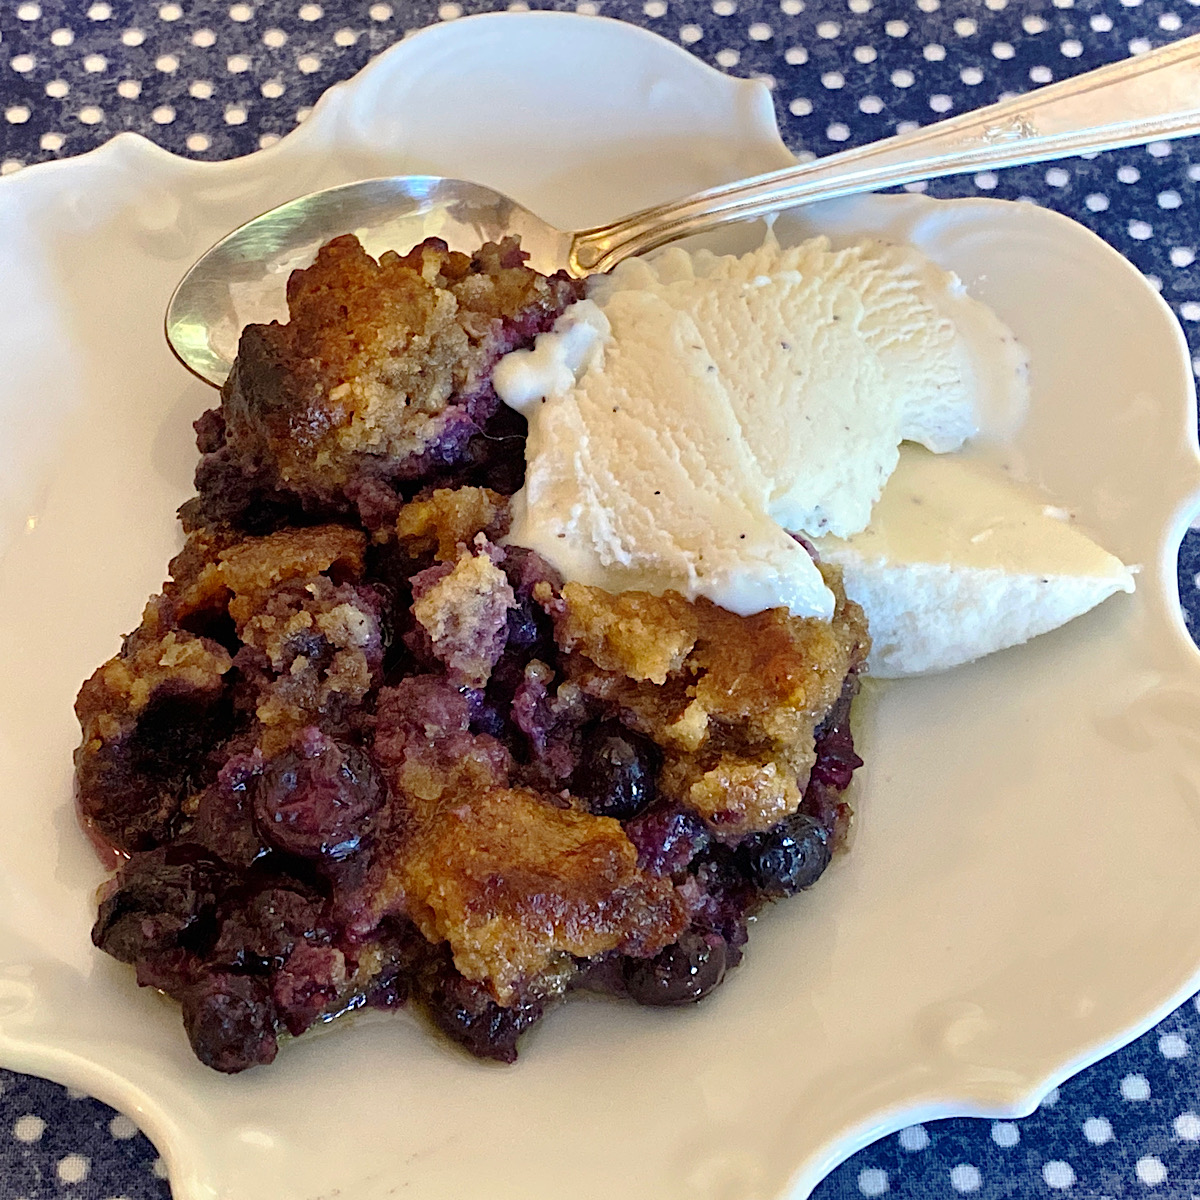 Low carb blueberry crumble with ice cream